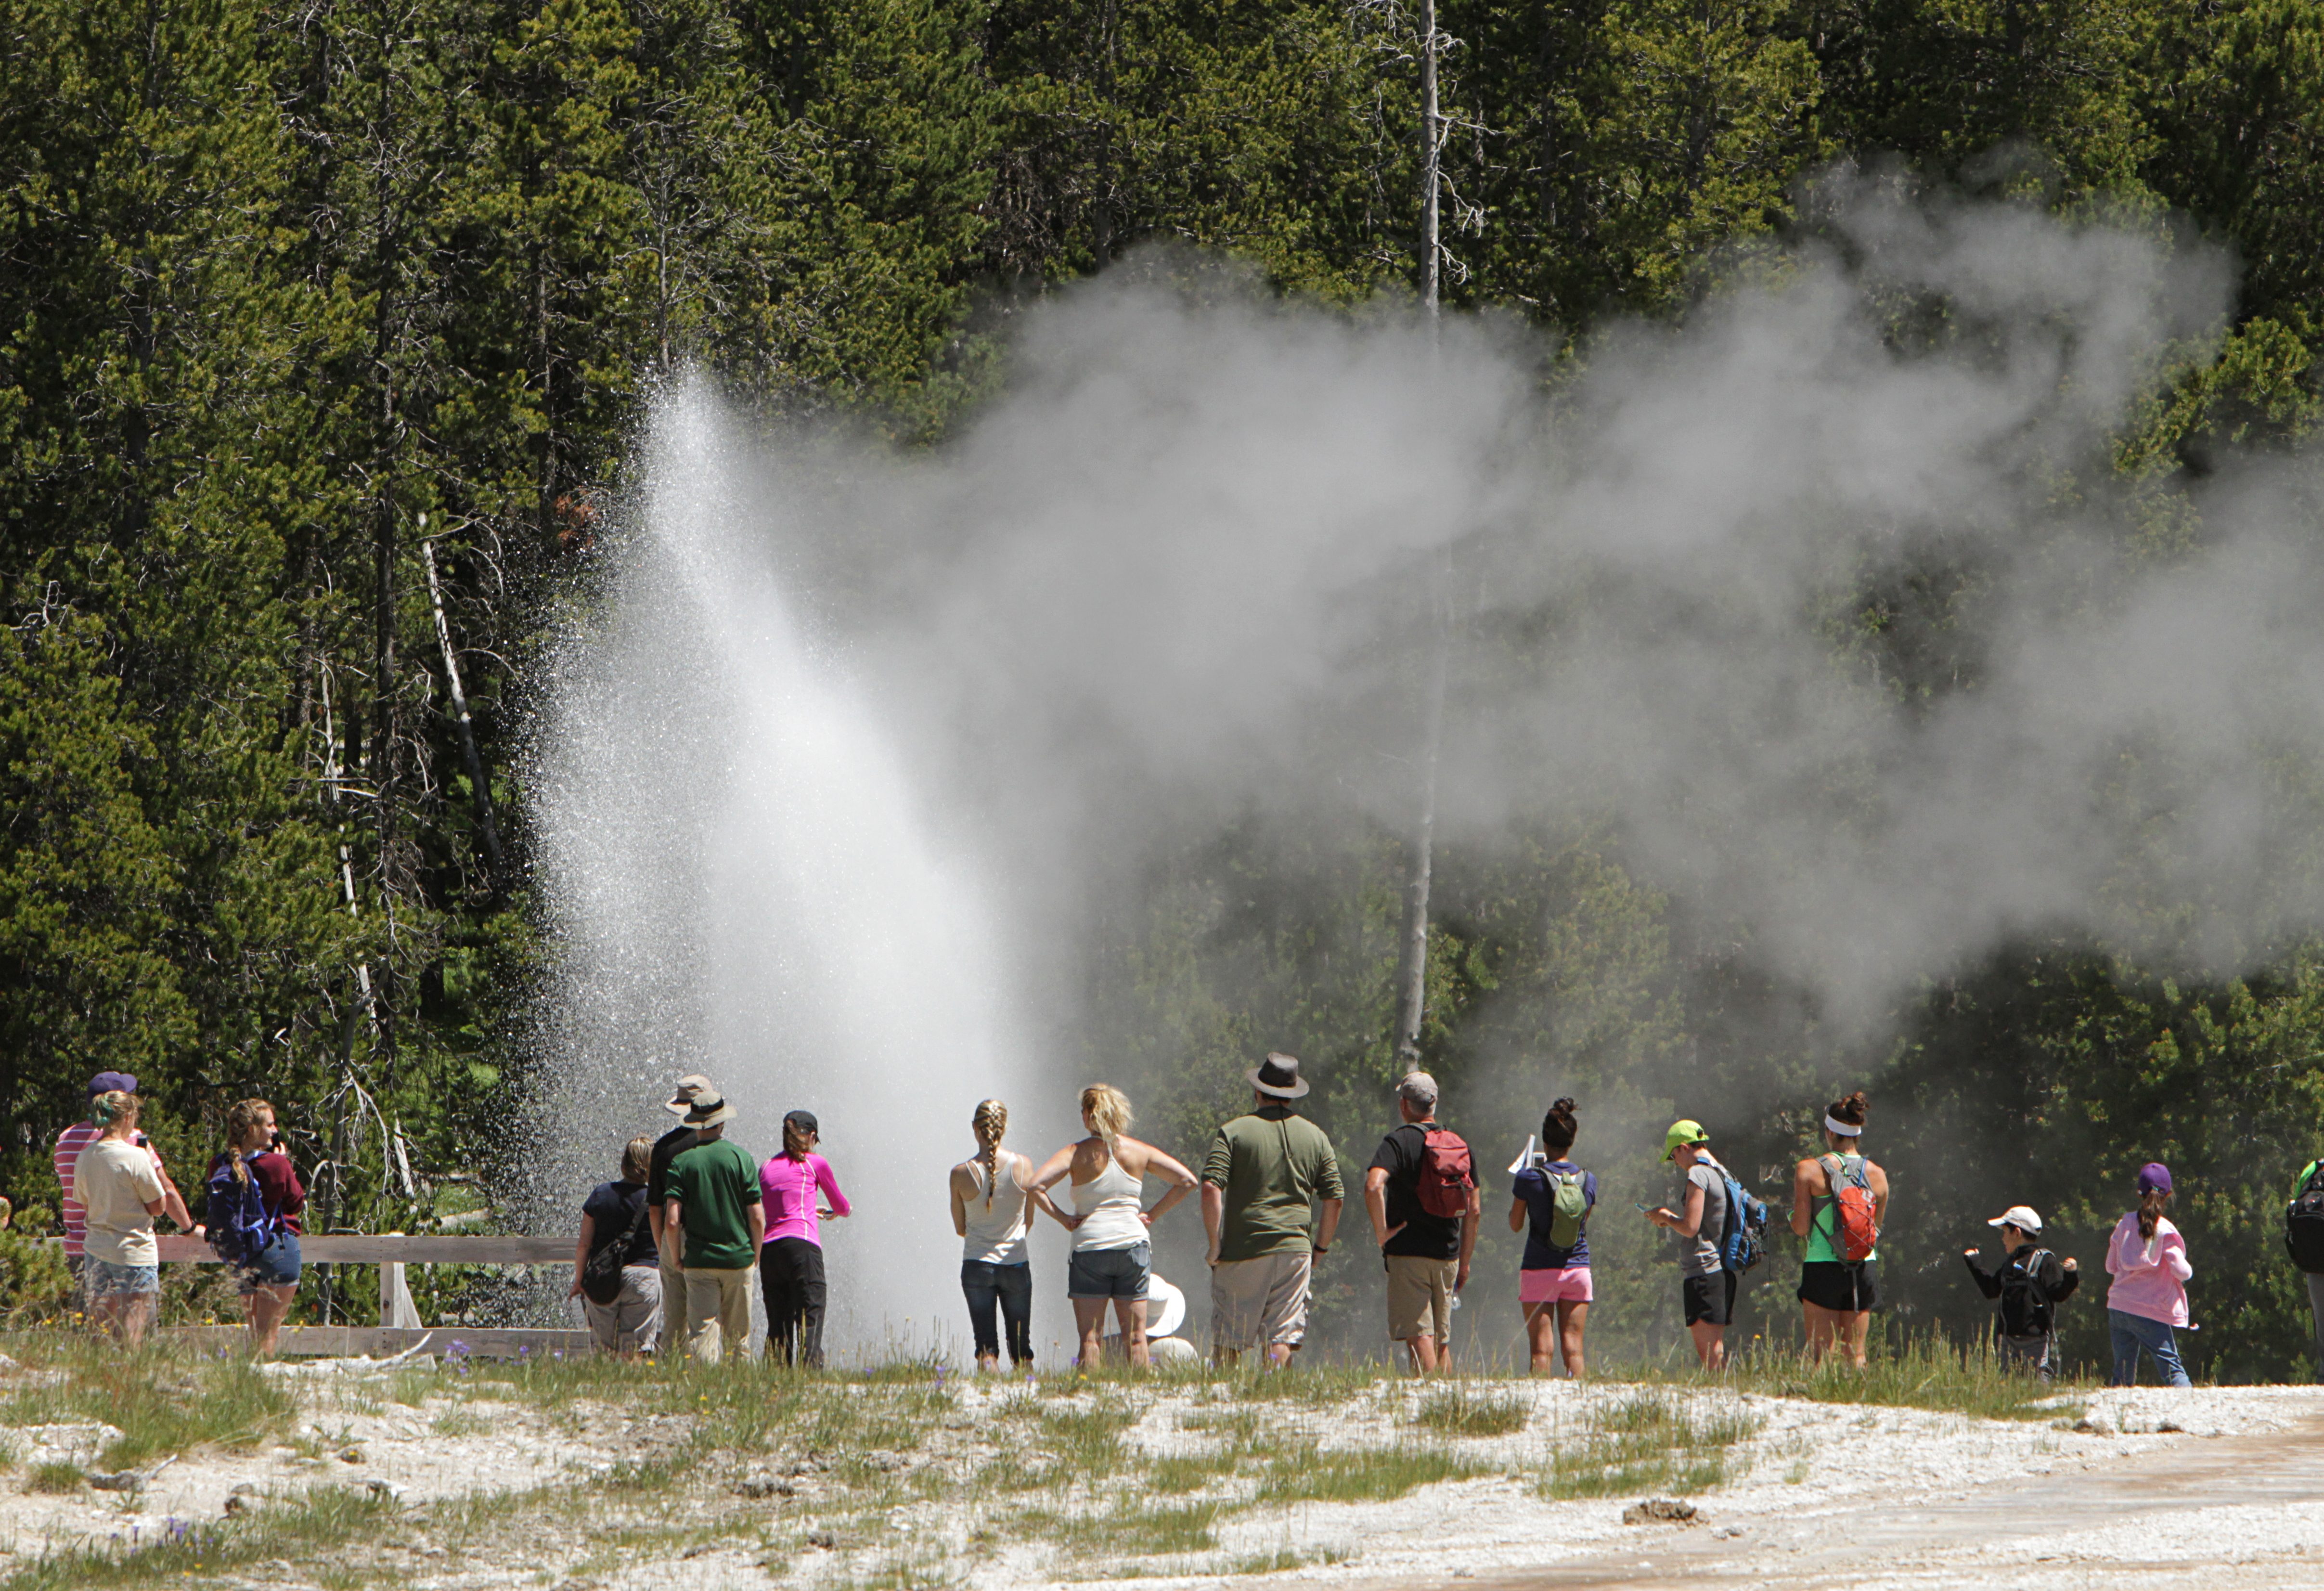 A crowd of people standing along a wooden boardwalk watches a geyser erupt.